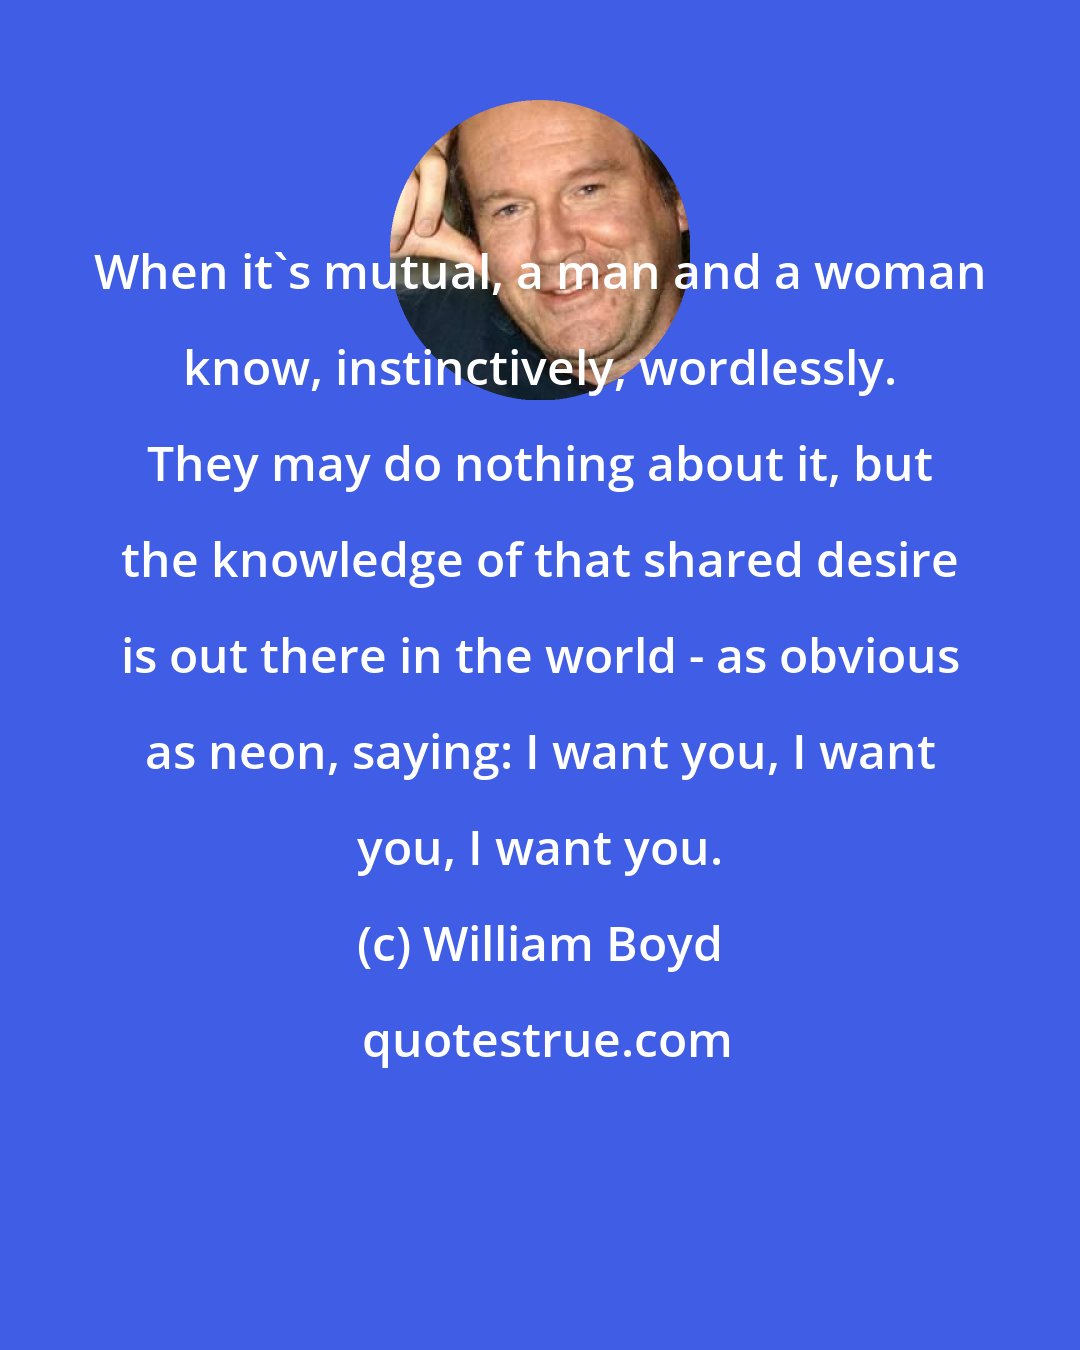 William Boyd: When it's mutual, a man and a woman know, instinctively, wordlessly. They may do nothing about it, but the knowledge of that shared desire is out there in the world - as obvious as neon, saying: I want you, I want you, I want you.